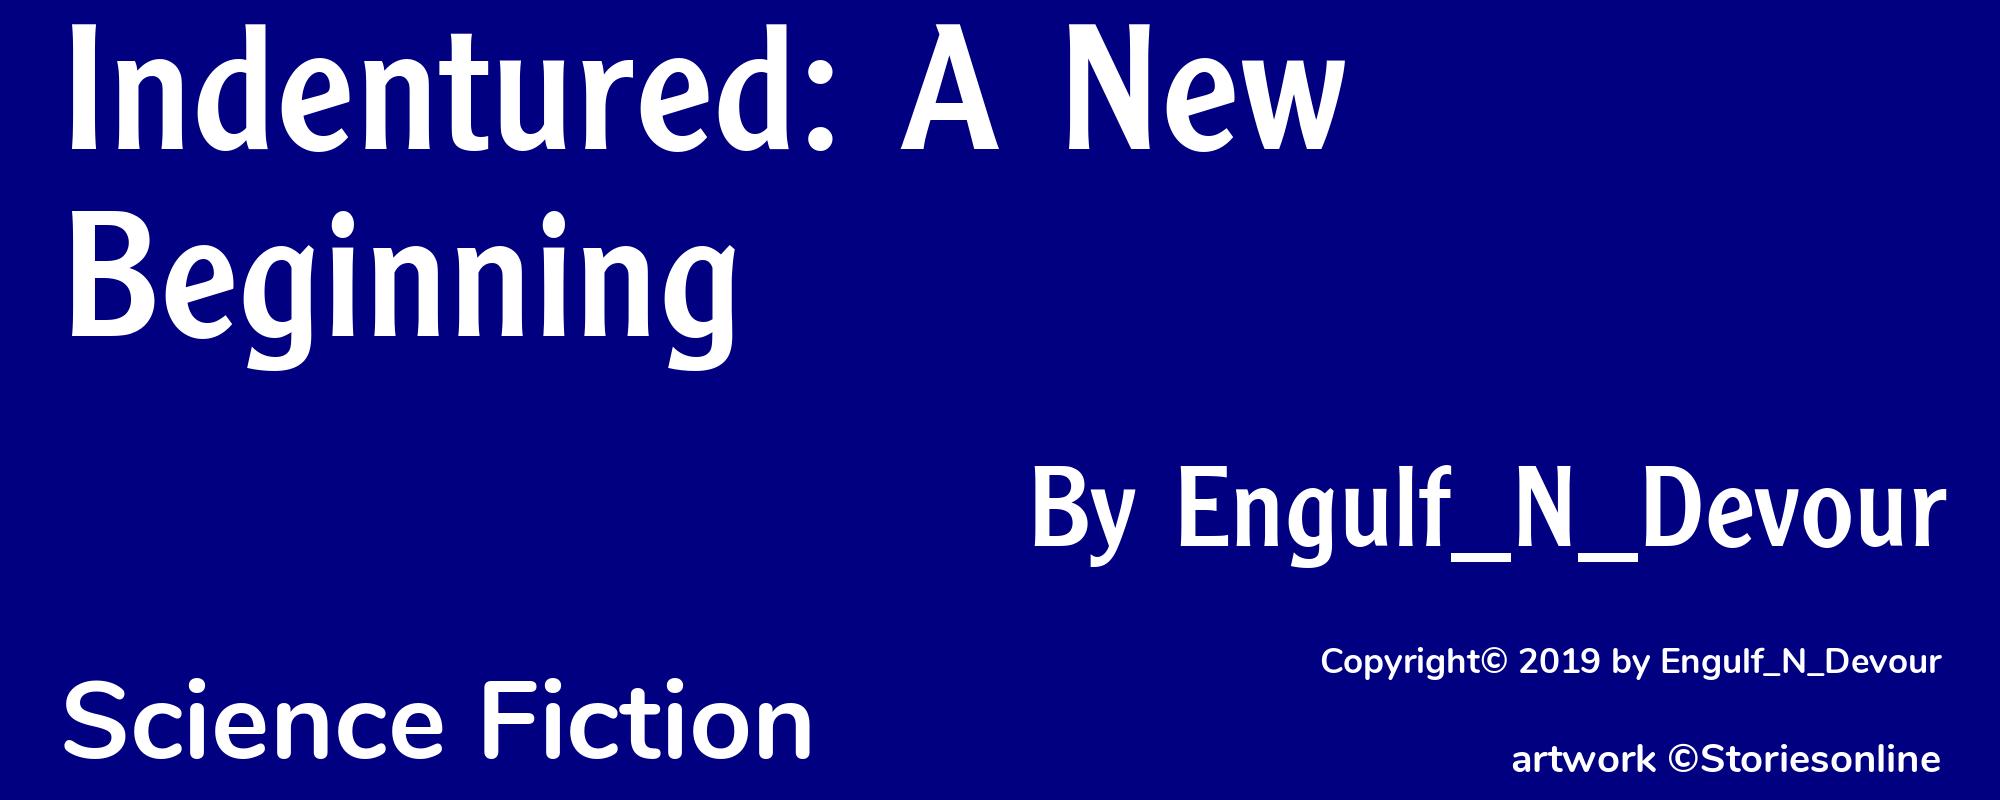 Indentured: A New Beginning - Cover